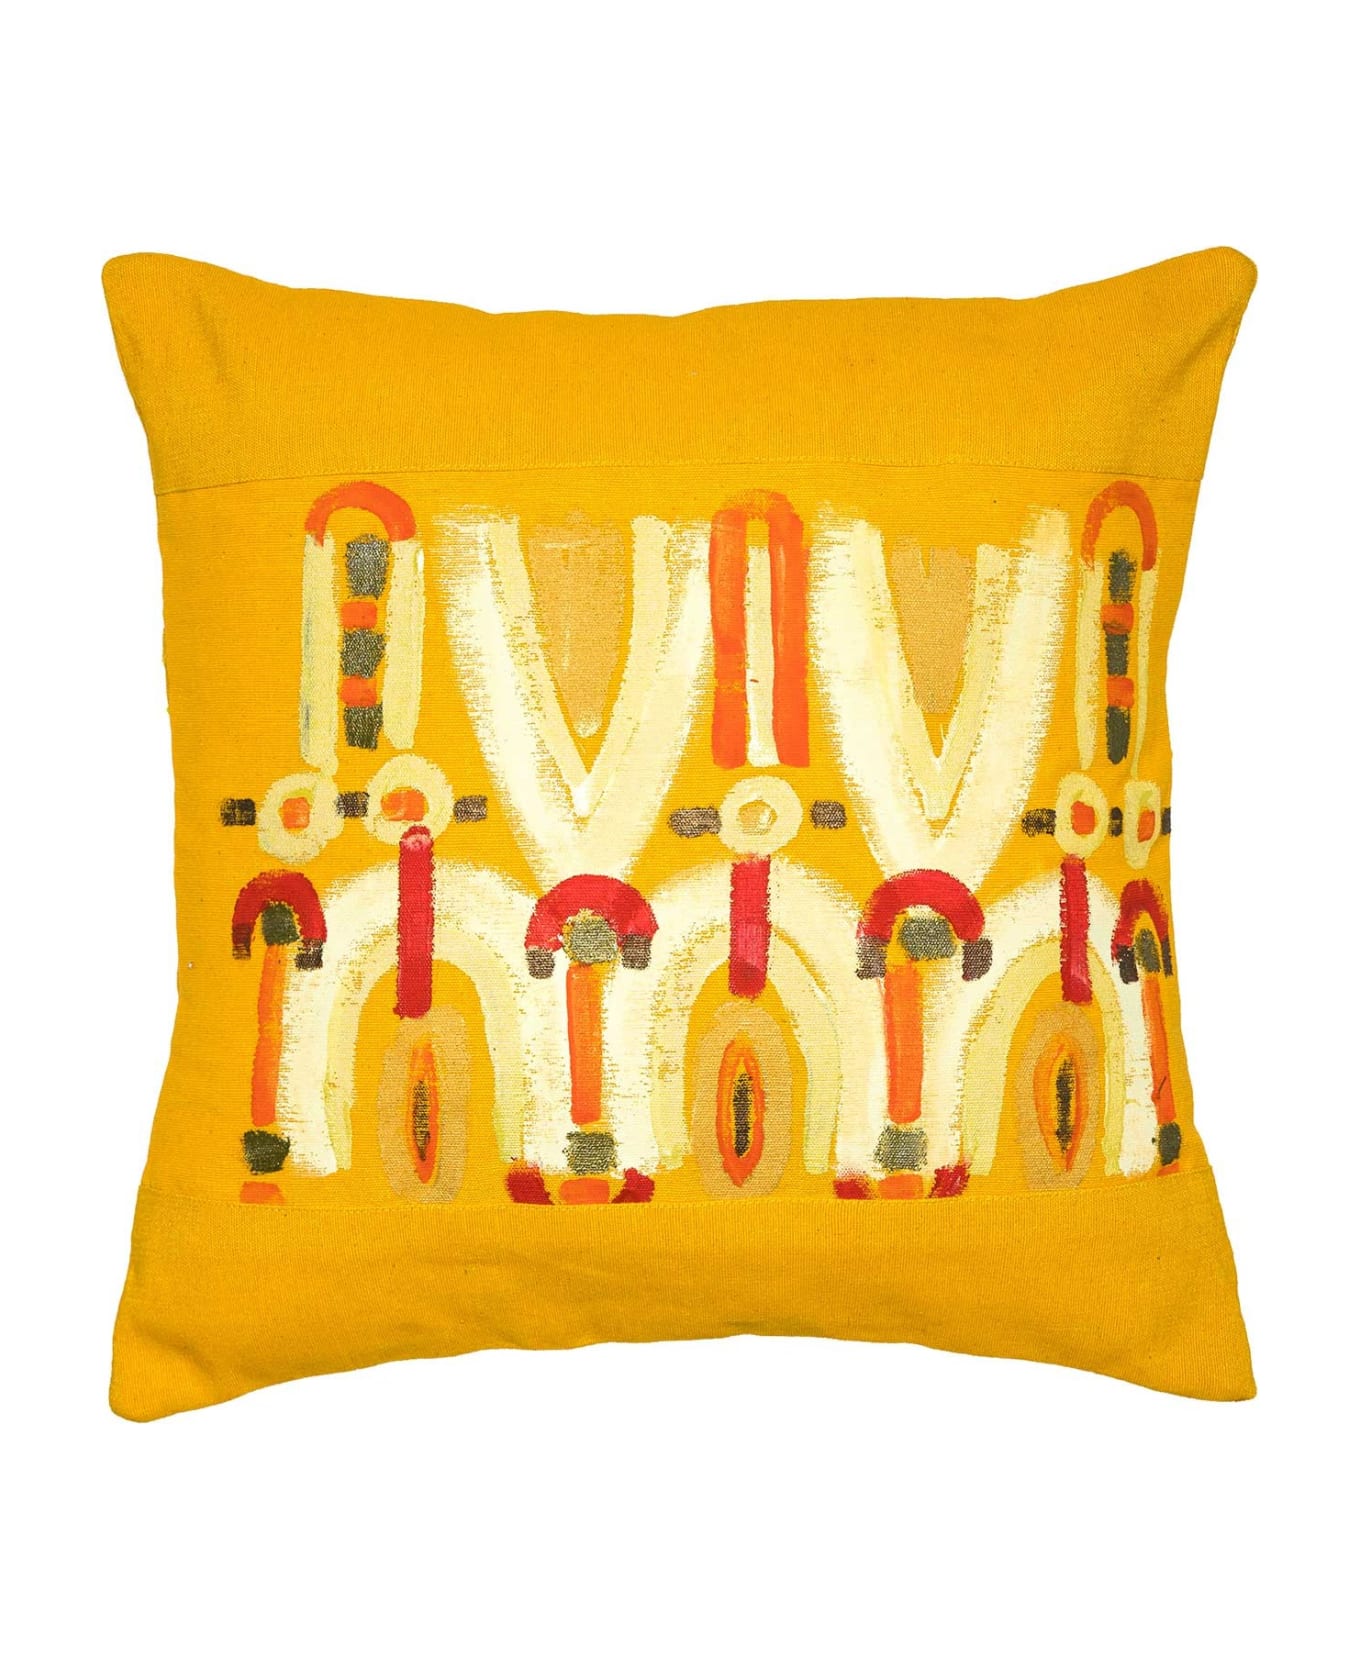 Le Botteghe su Gologone Cotton Hand Painted Indoor Cushion 50x50 cm - Yellow Fantasy